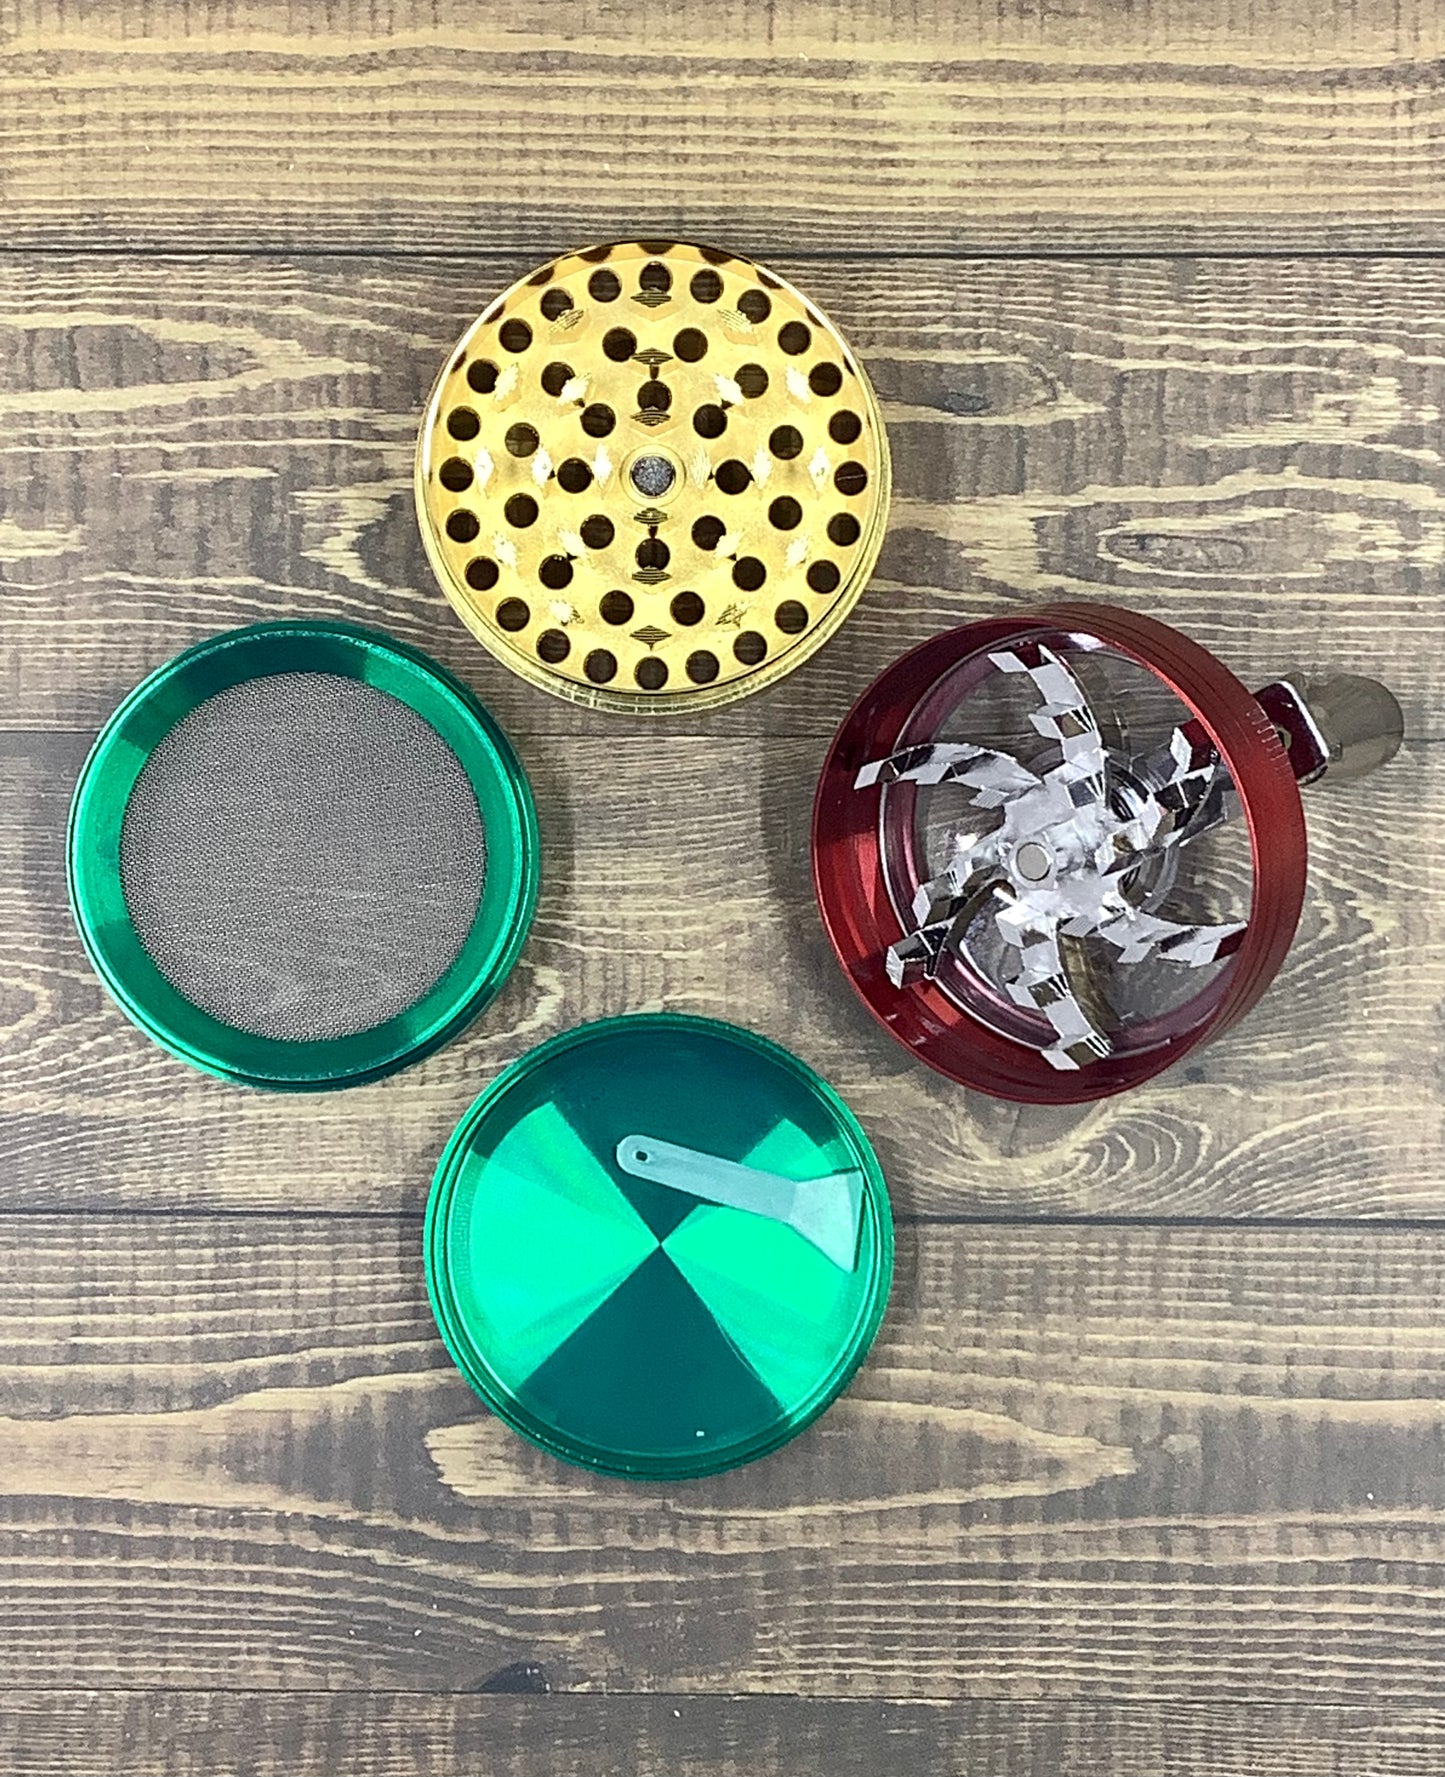 2 Inch Metal Rasta Color Grinder w/ Crank Handle Top yoga smokes yoga studio, delivery, delivery near me, yoga smokes smoke shop, find smoke shop, head shop near me, yoga studio, headshop, head shop, local smoke shop, psl, psl smoke shop, smoke shop, smokeshop, yoga, yoga studio, dispensary, local dispensary, smokeshop near me, port saint lucie, florida, port st lucie, lounge, life, highlife, love, stoned, highsociety. Yoga Smokes